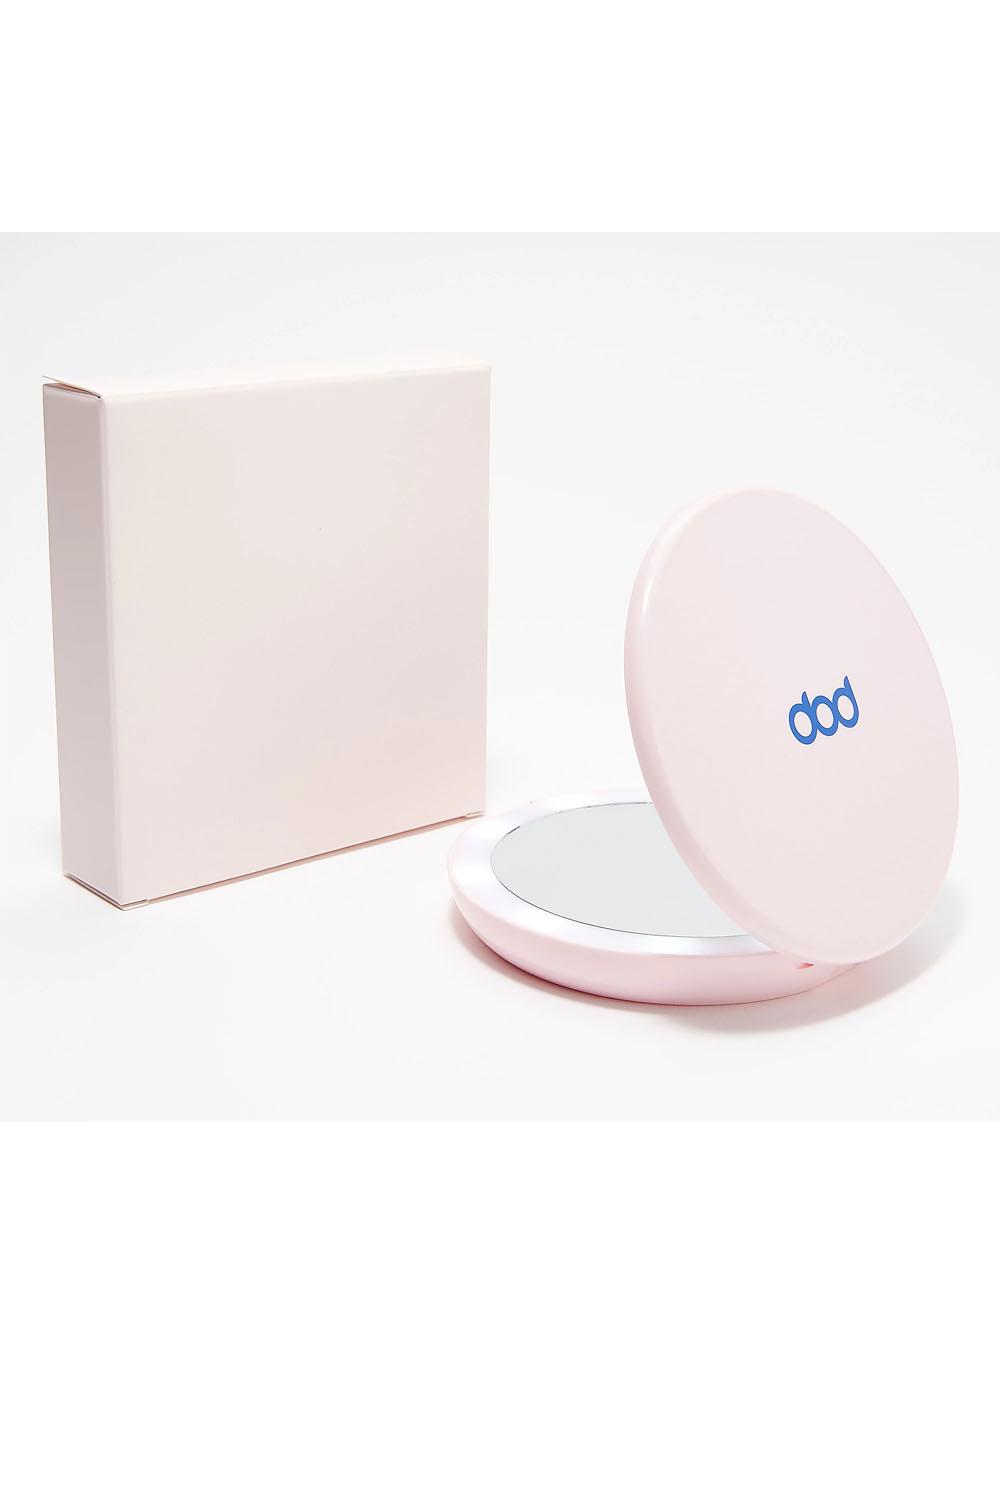 LED Compact Mirror - Shop Popsonic